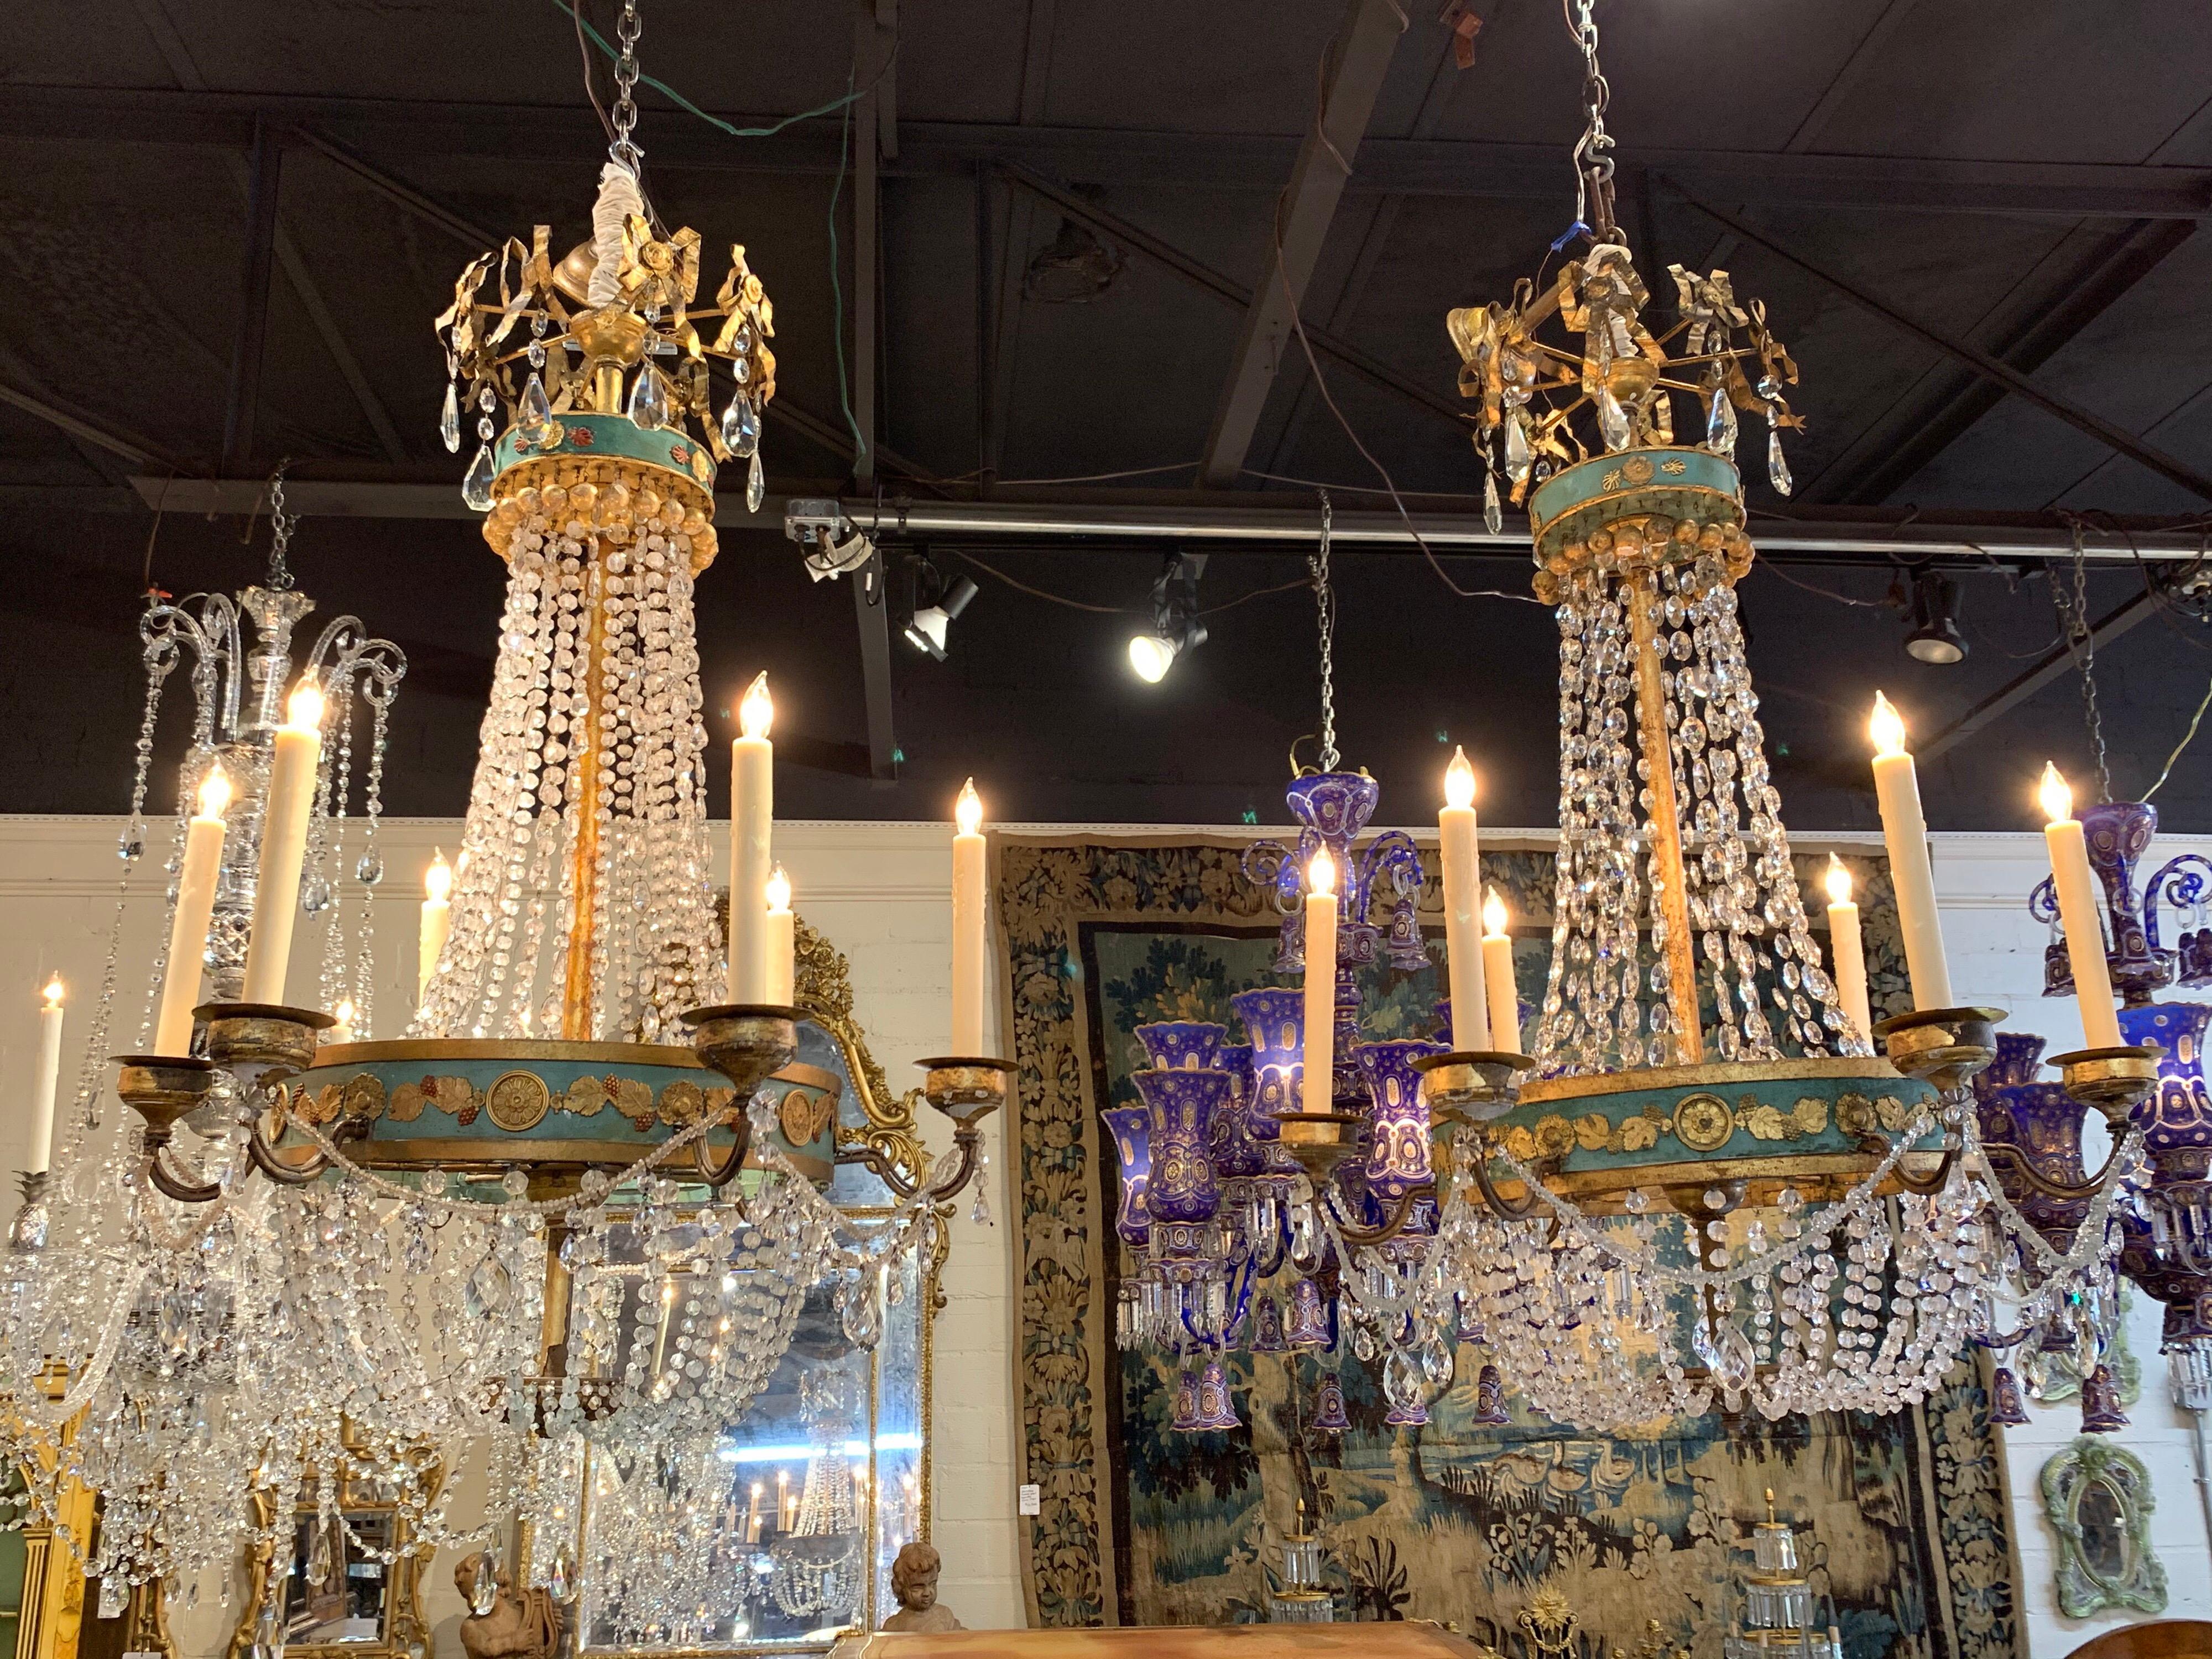 Exquisite pair of 18th century Italian neoclassical crystal and painted tole basket chandeliers with 6 lights. Crystals on these are outstanding. Beautiful tole patterns with leaves, grapes and flowers. An exceptional pair!